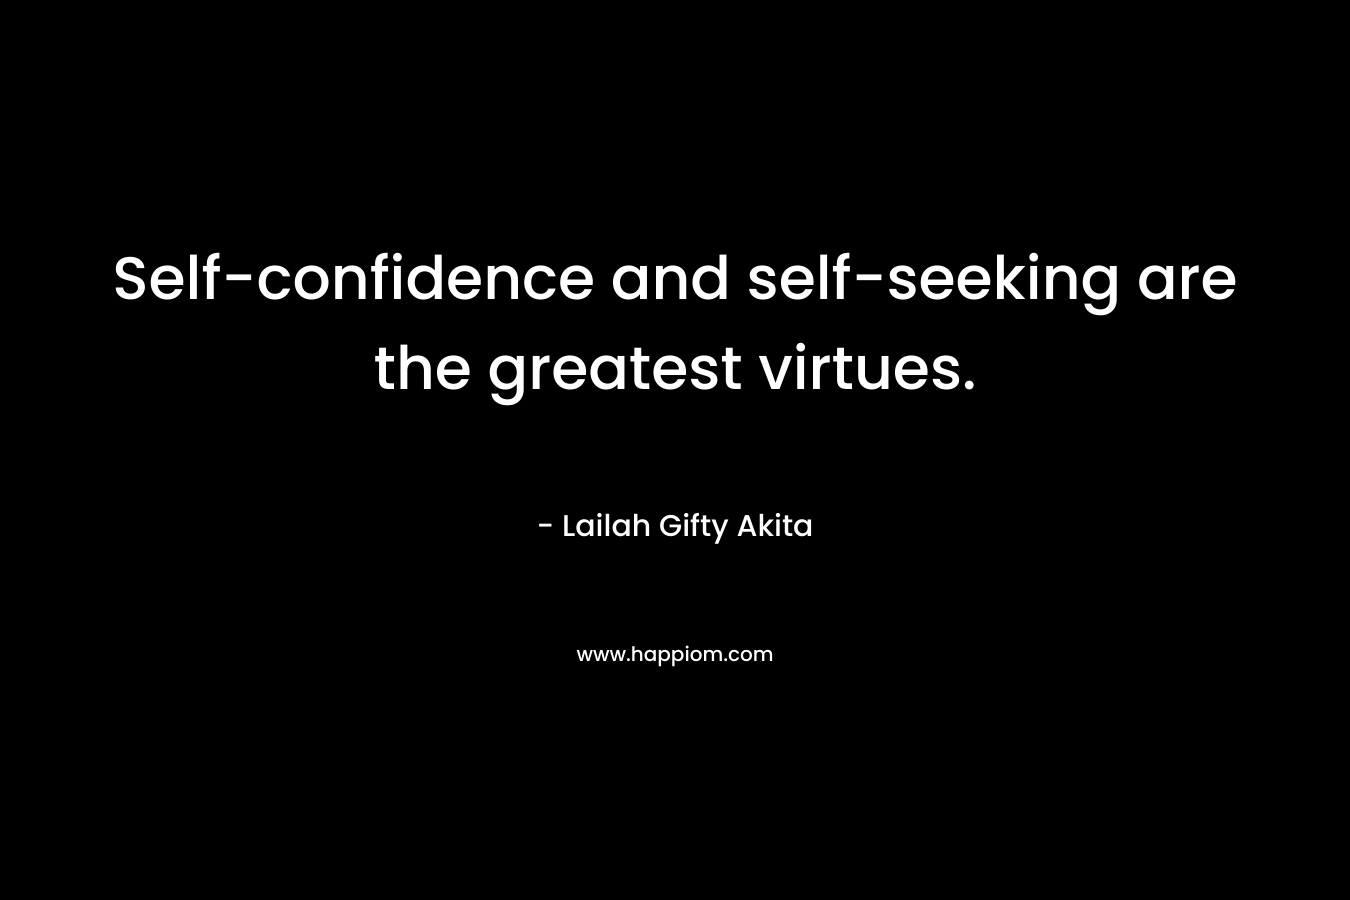 Self-confidence and self-seeking are the greatest virtues.